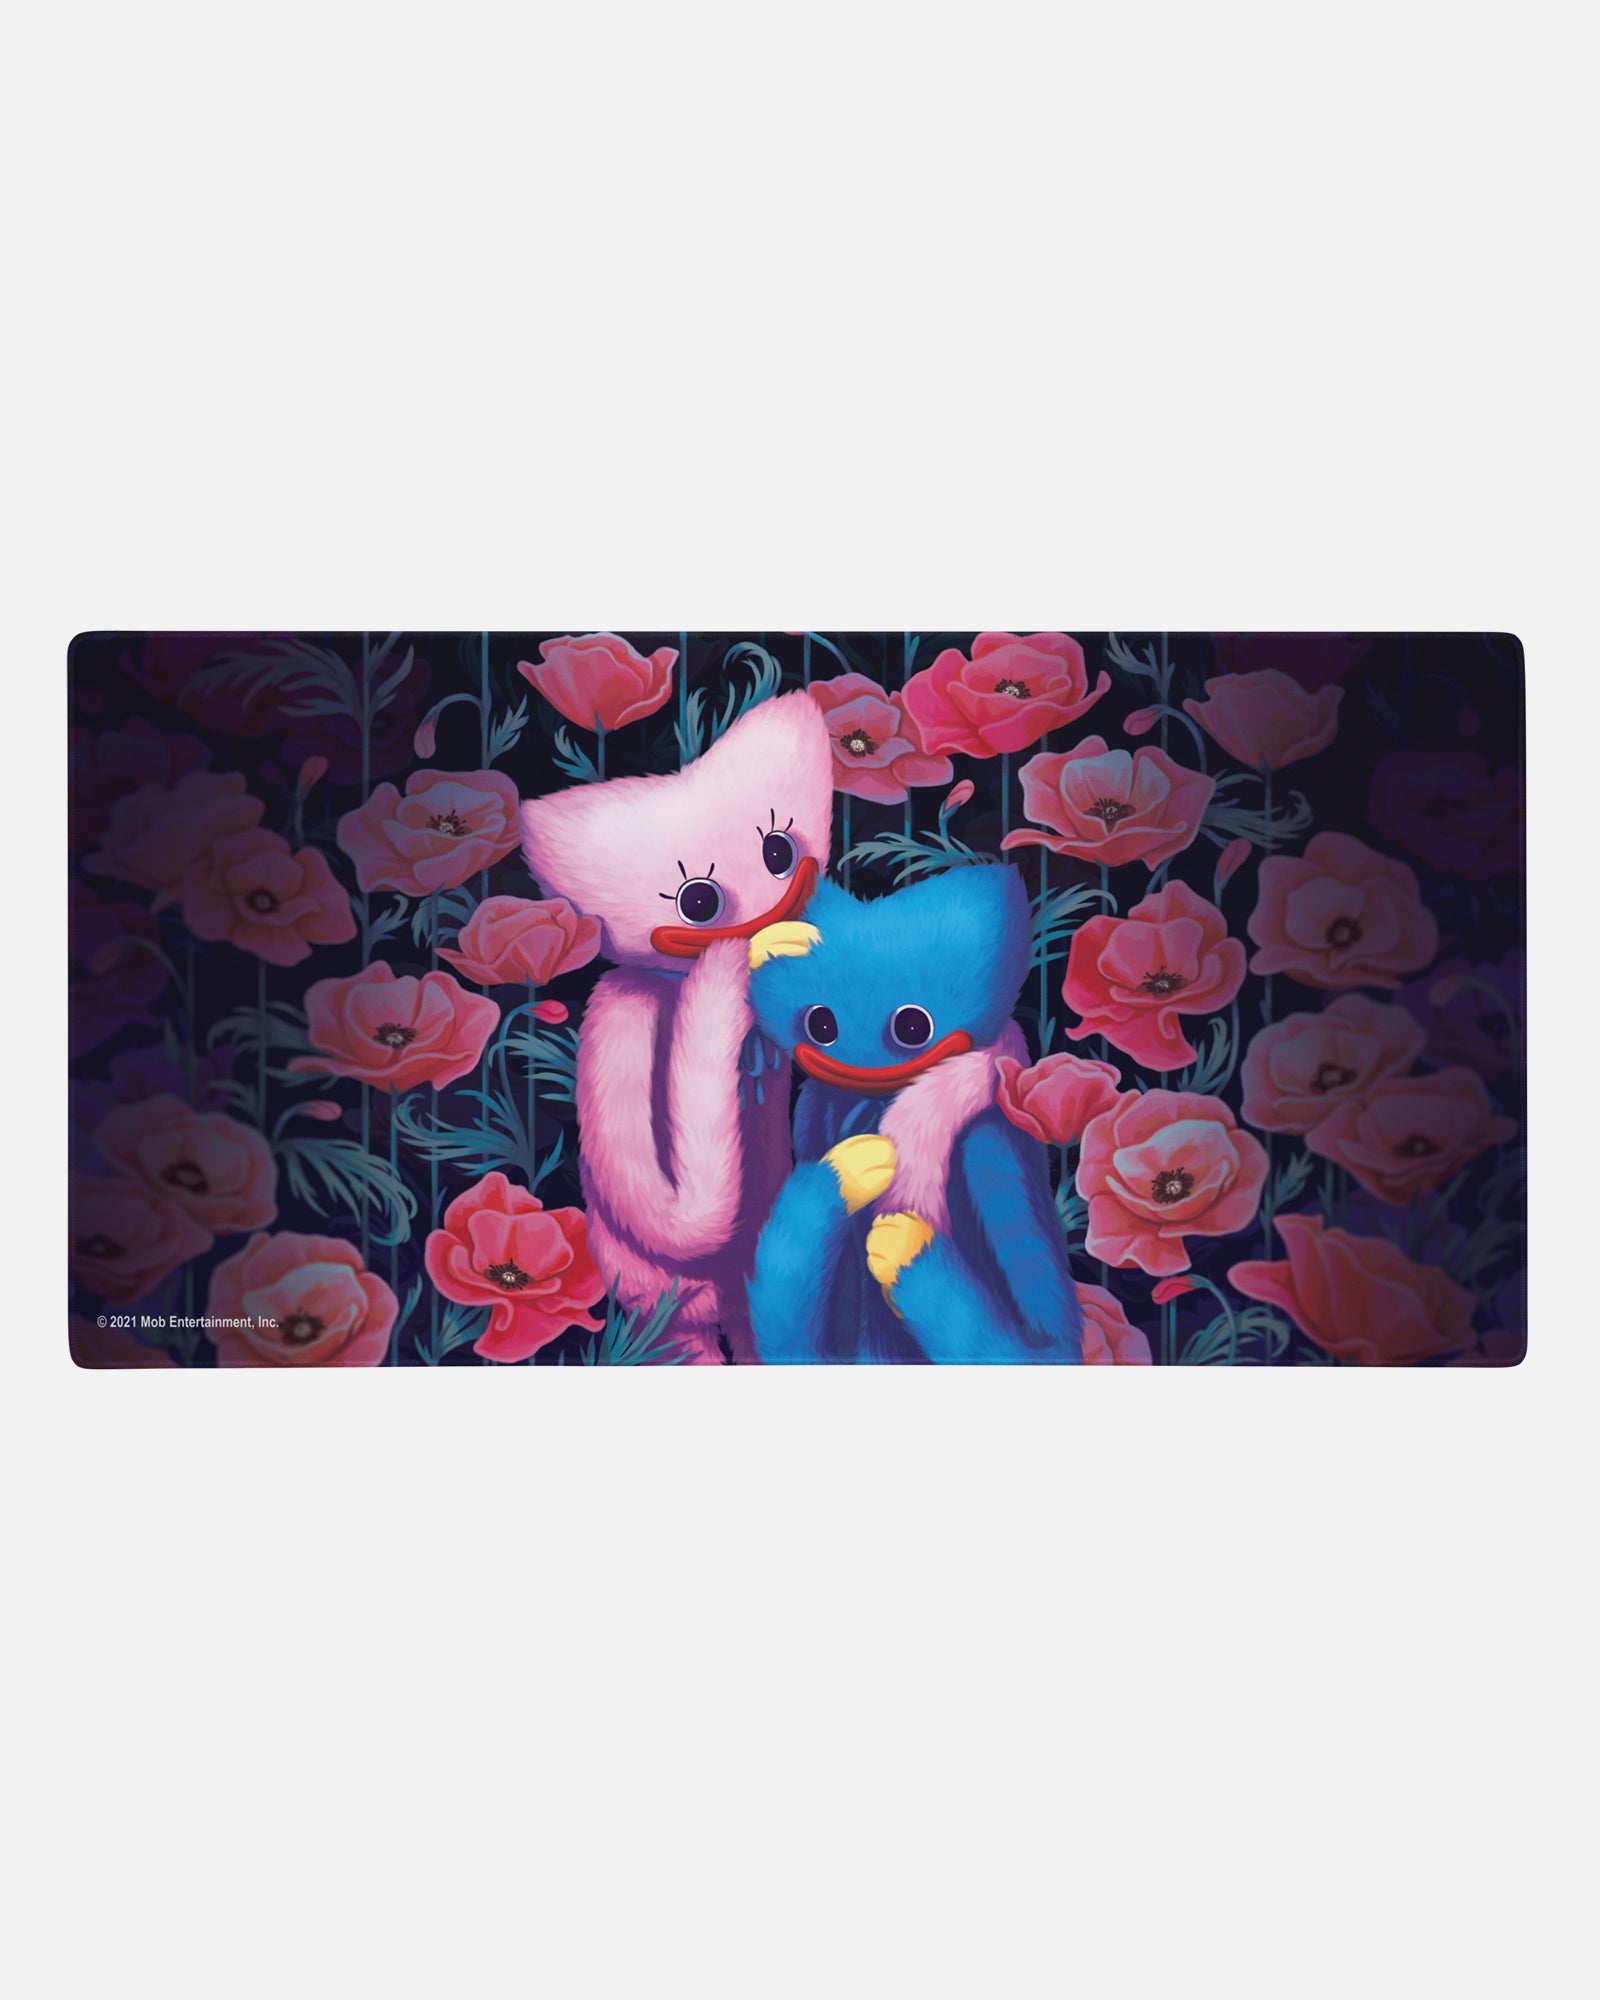 kissy missy huggy wuggy gamer mousepad. image: kissy missy and huggy wuggy holding each other in a field of poppy flowers